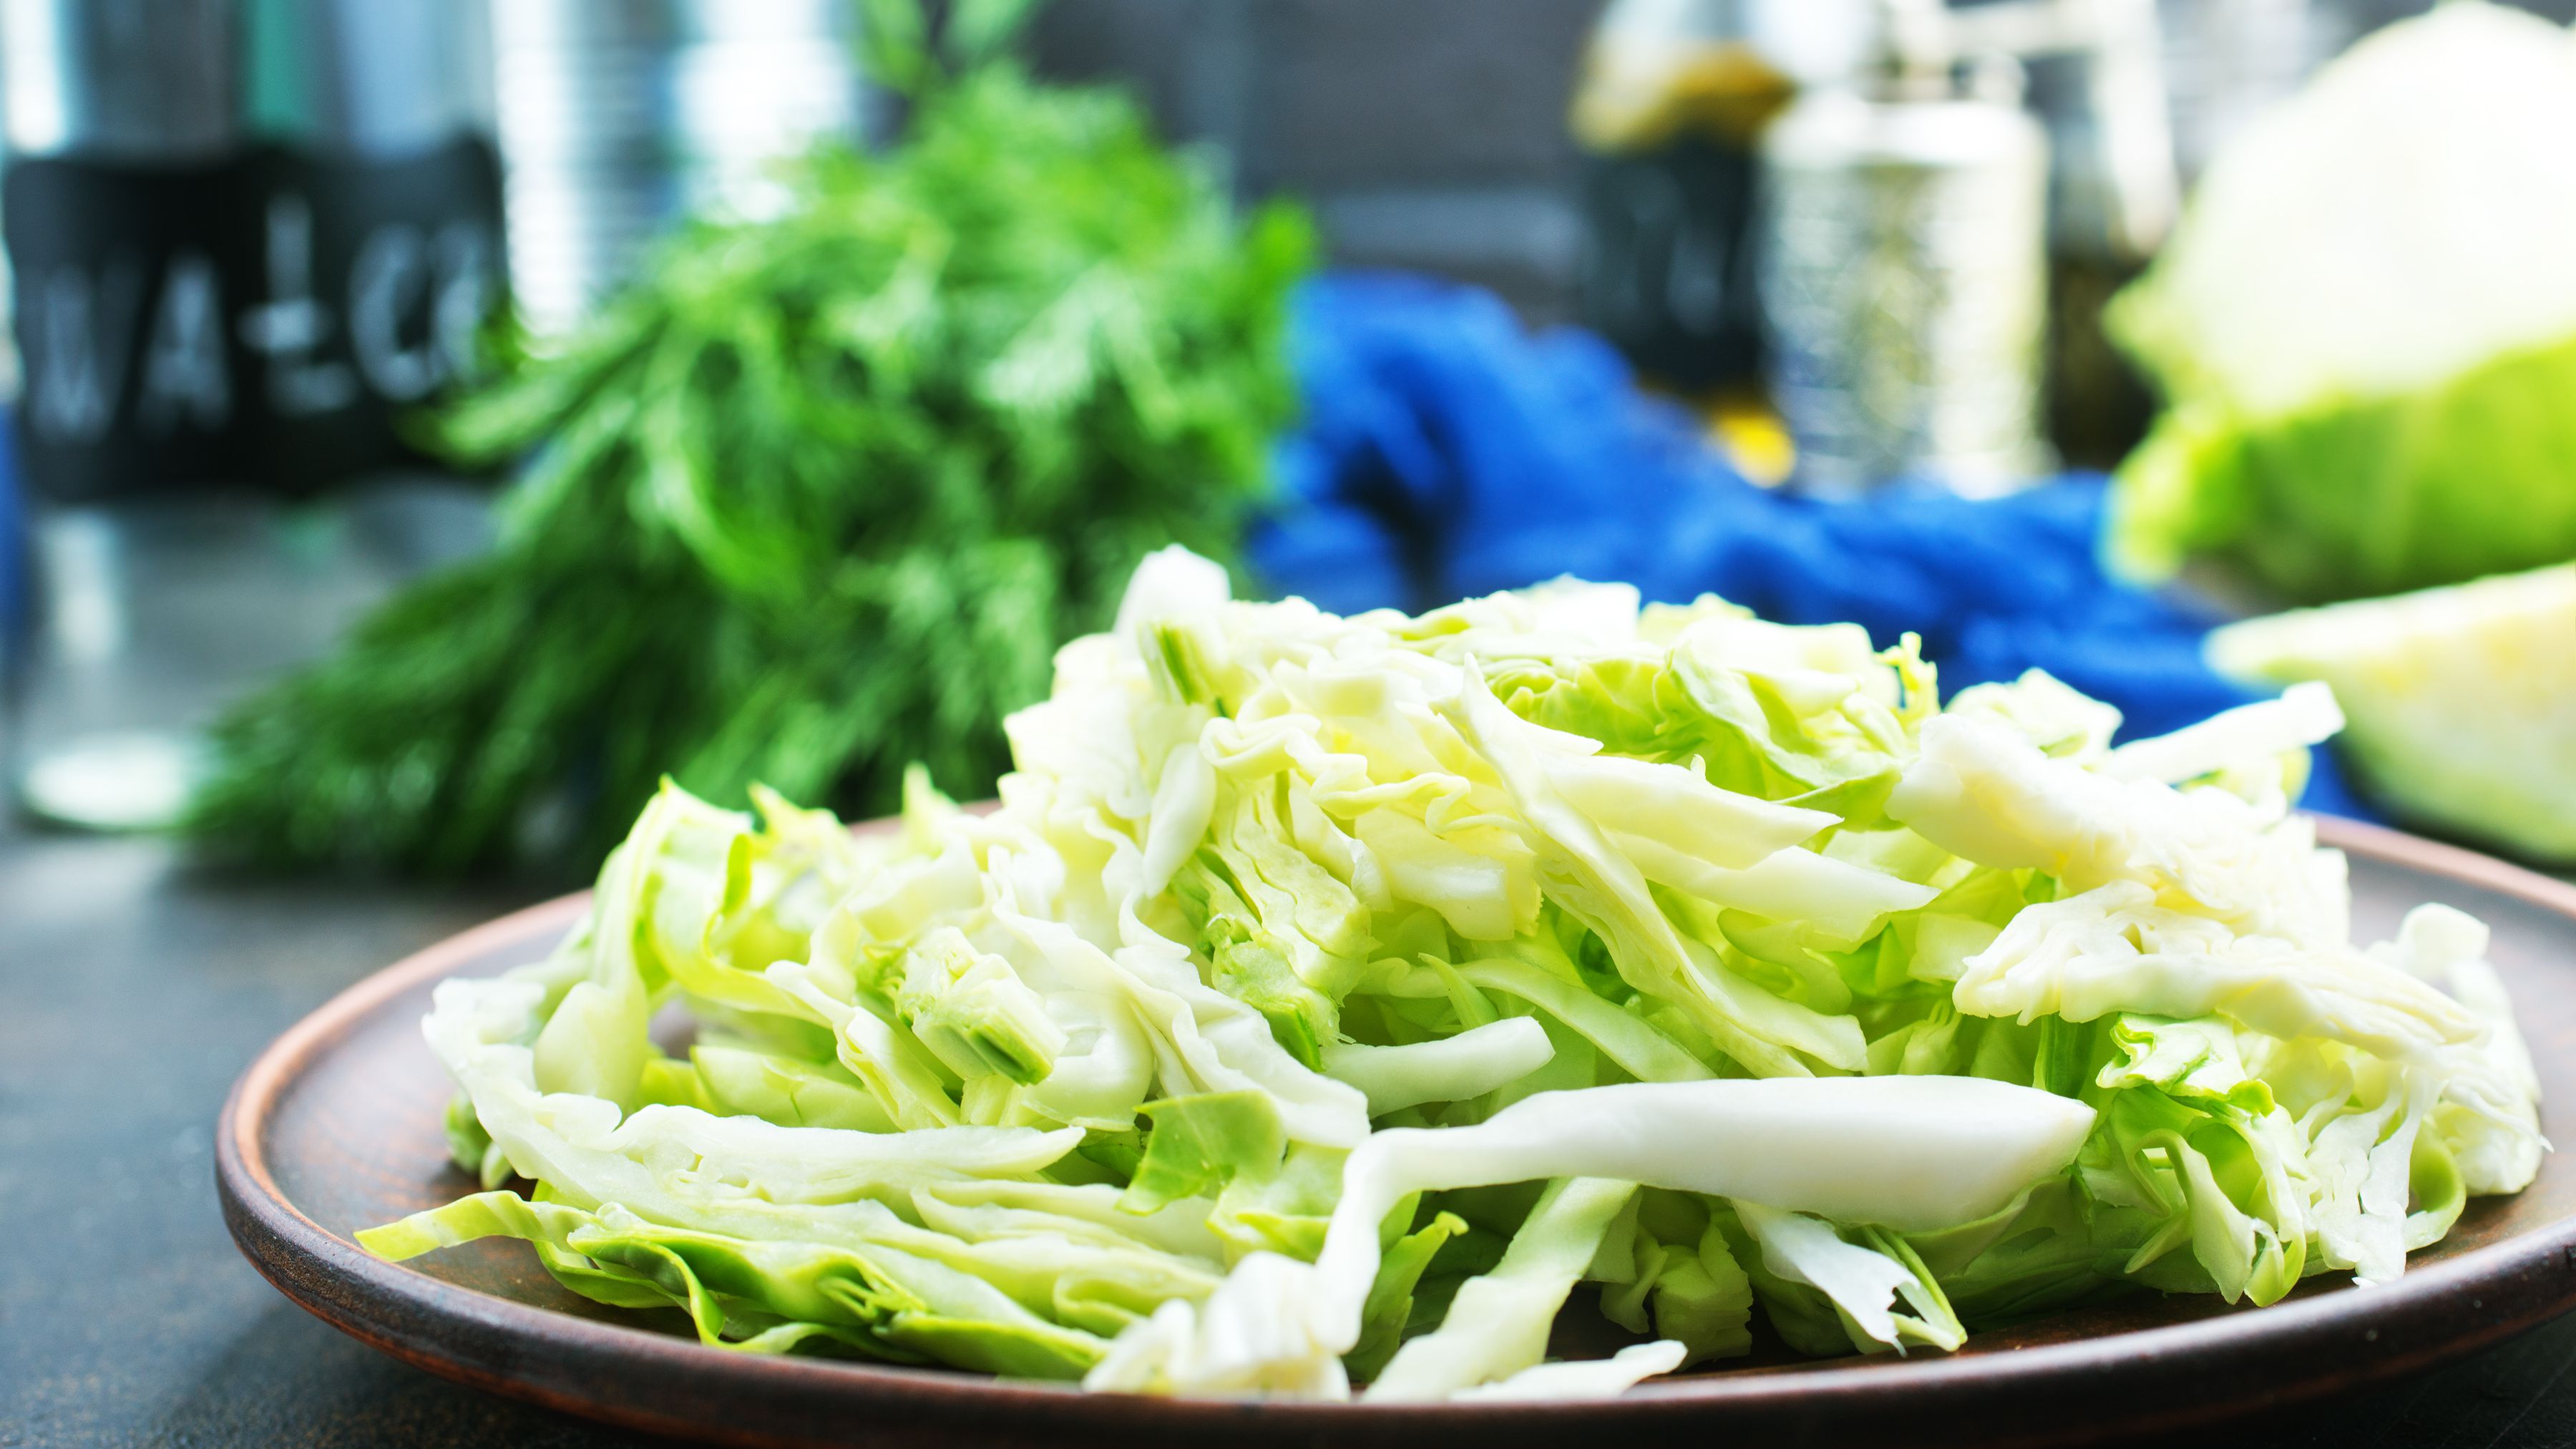 There is a scientific explanation for not liking salad and vegetables